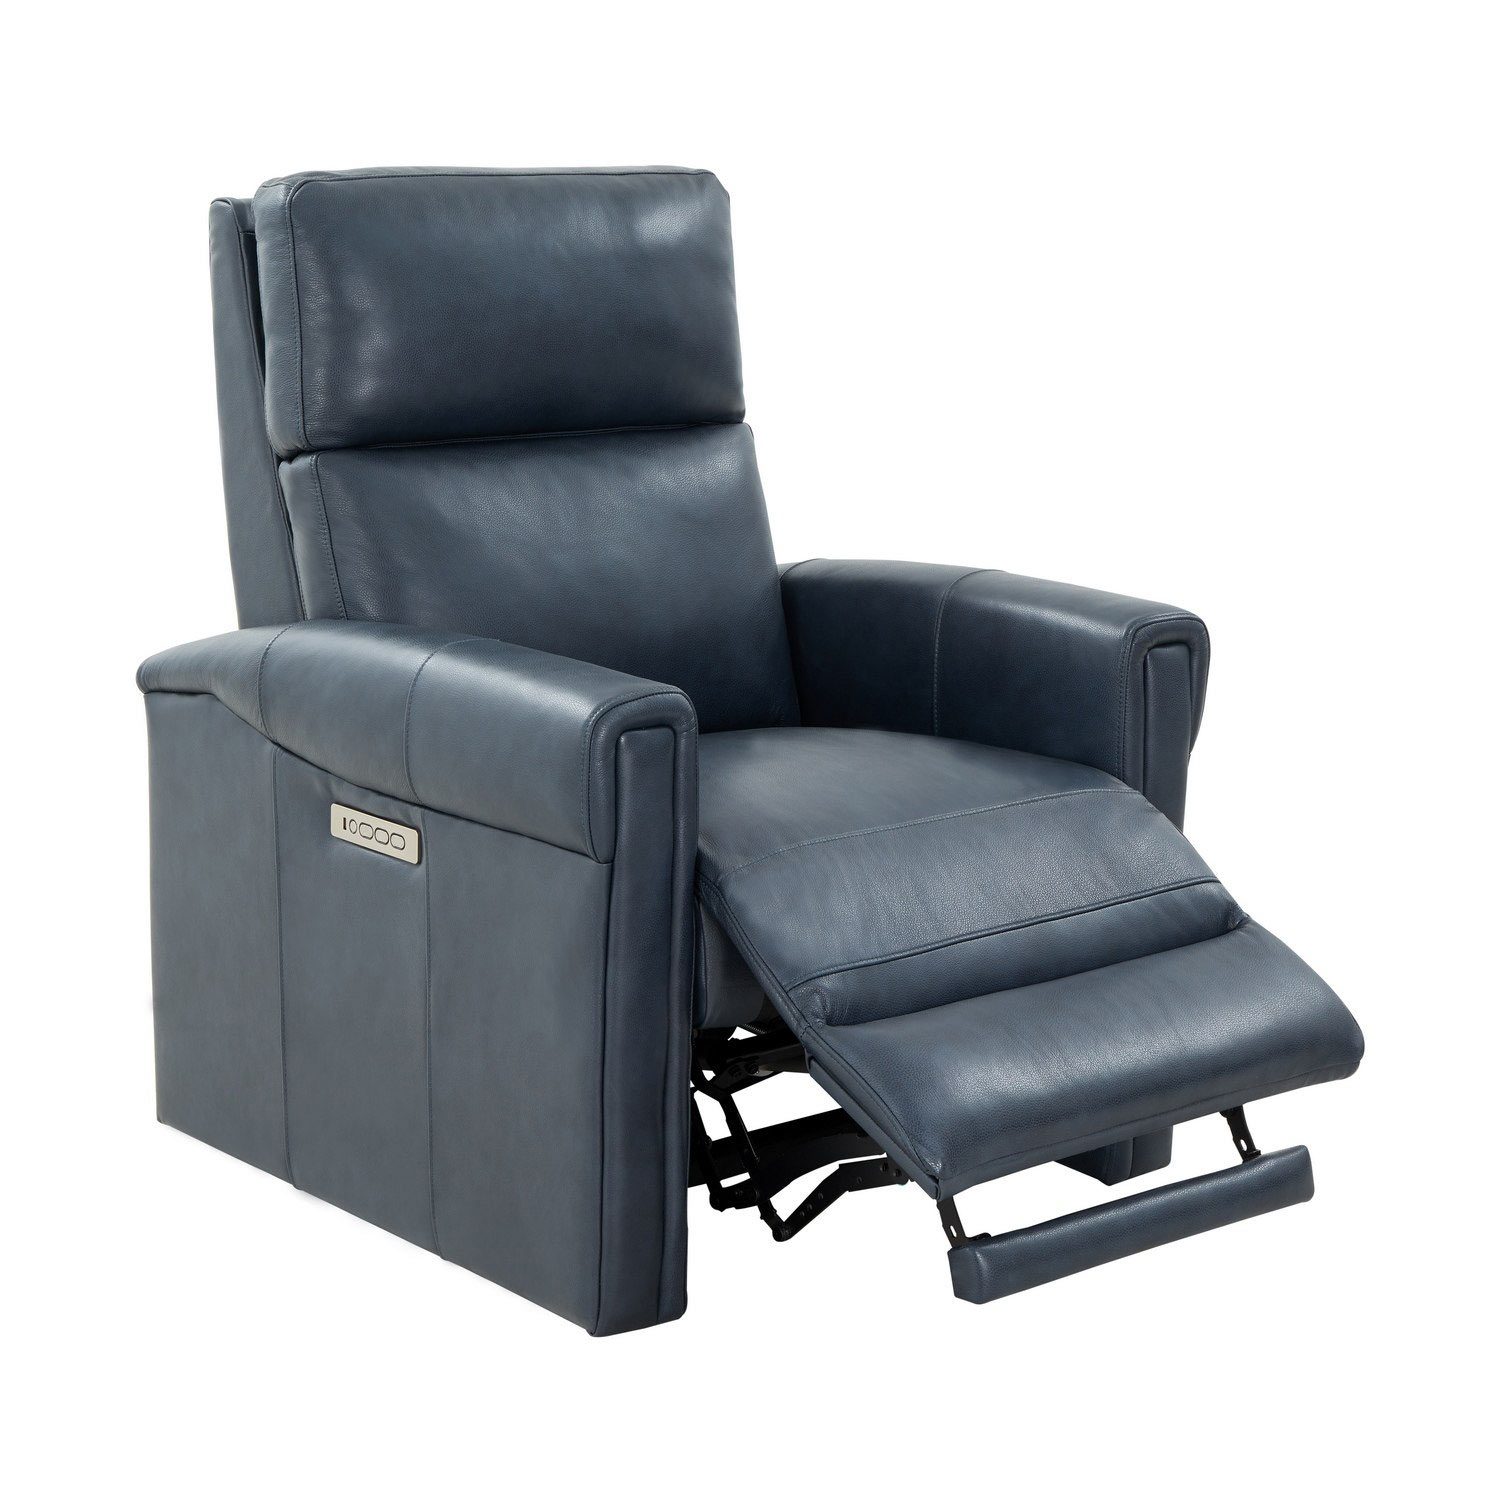 Barcalounger Jeffrey Zero Gravity Power Recliner Chair with Power Head Rest and Lumbar - Barone Navy Blue/All Leather